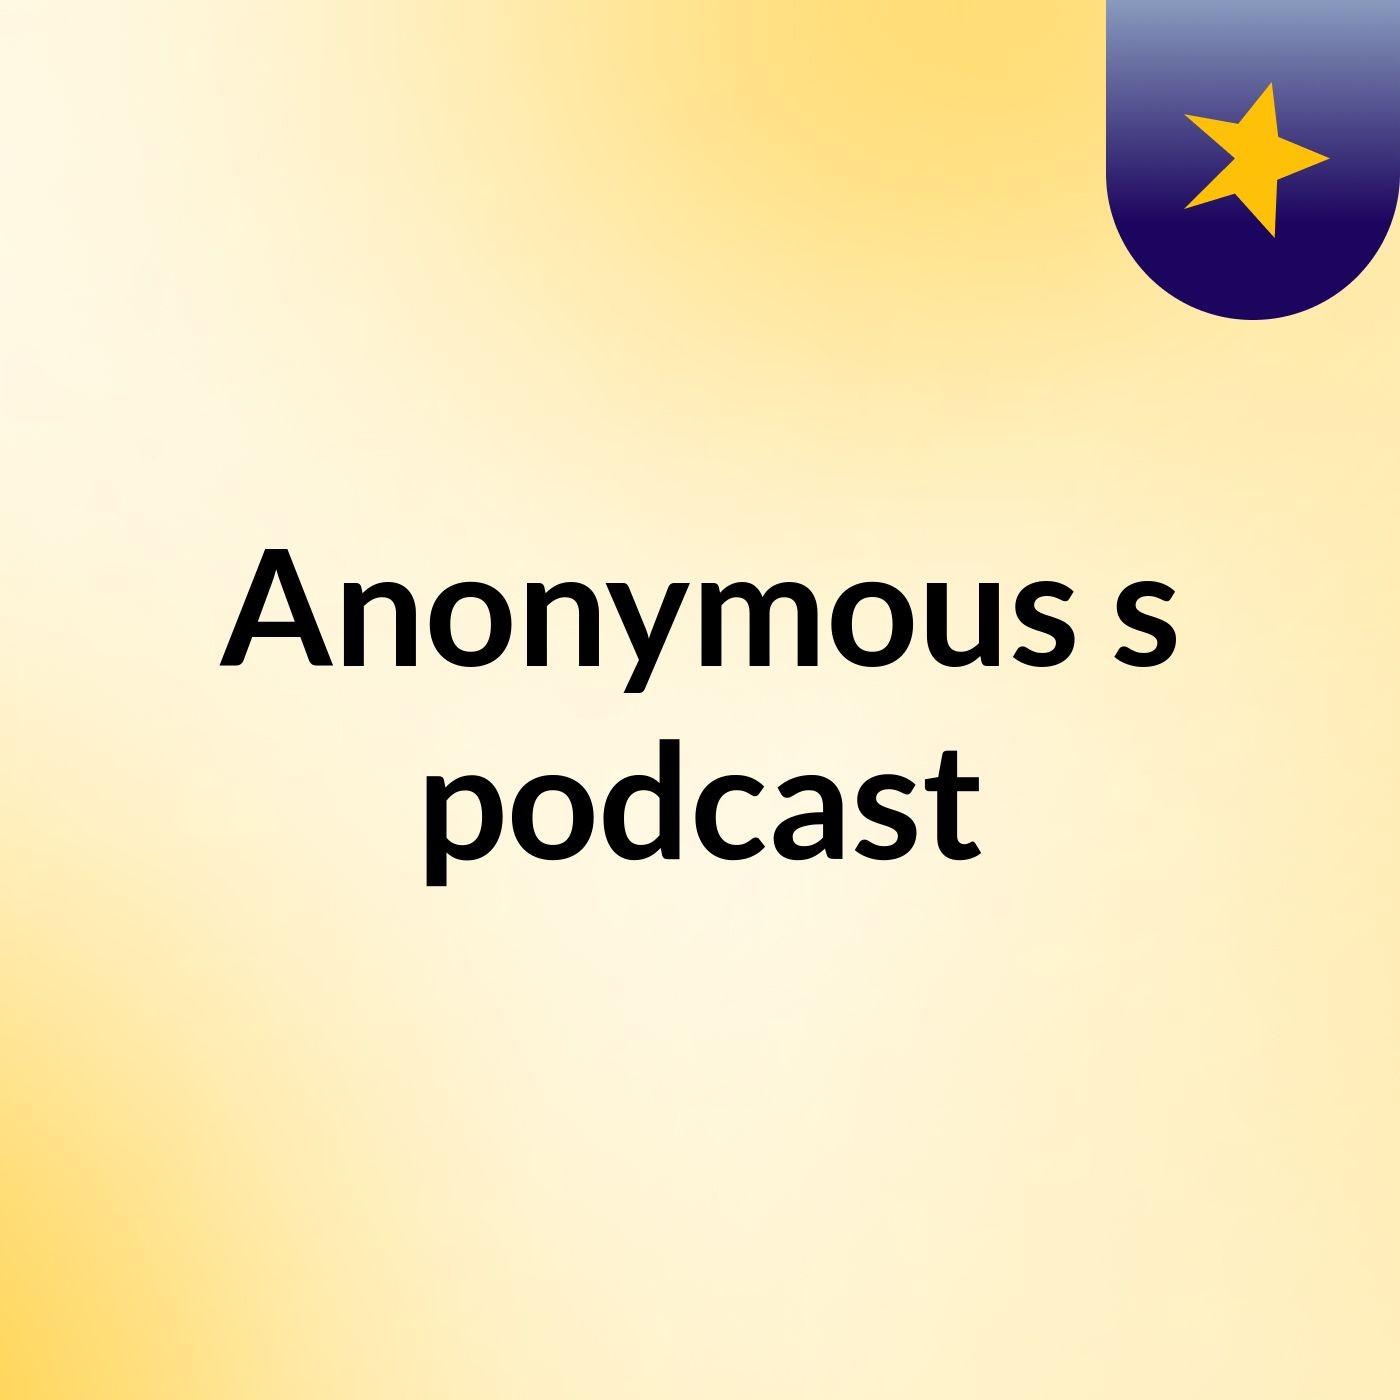 Anonymous's podcast